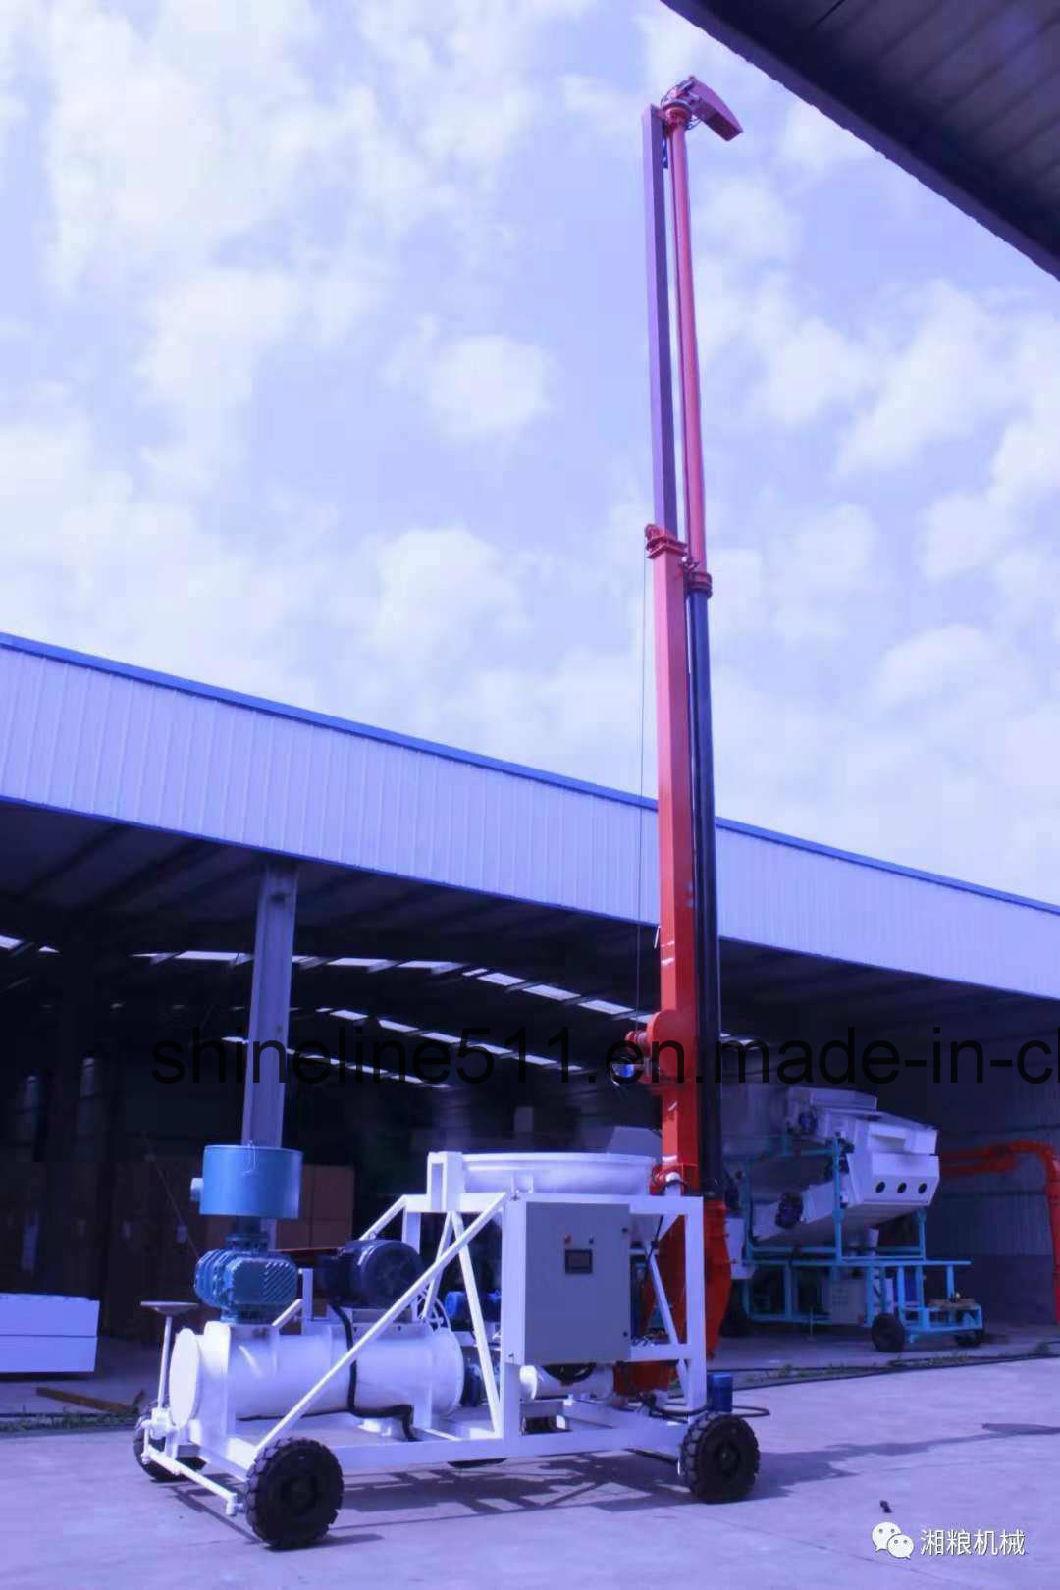 New Available Xiangliang Brand Standard Exportatiion Packing Auger Conveyor Unloader